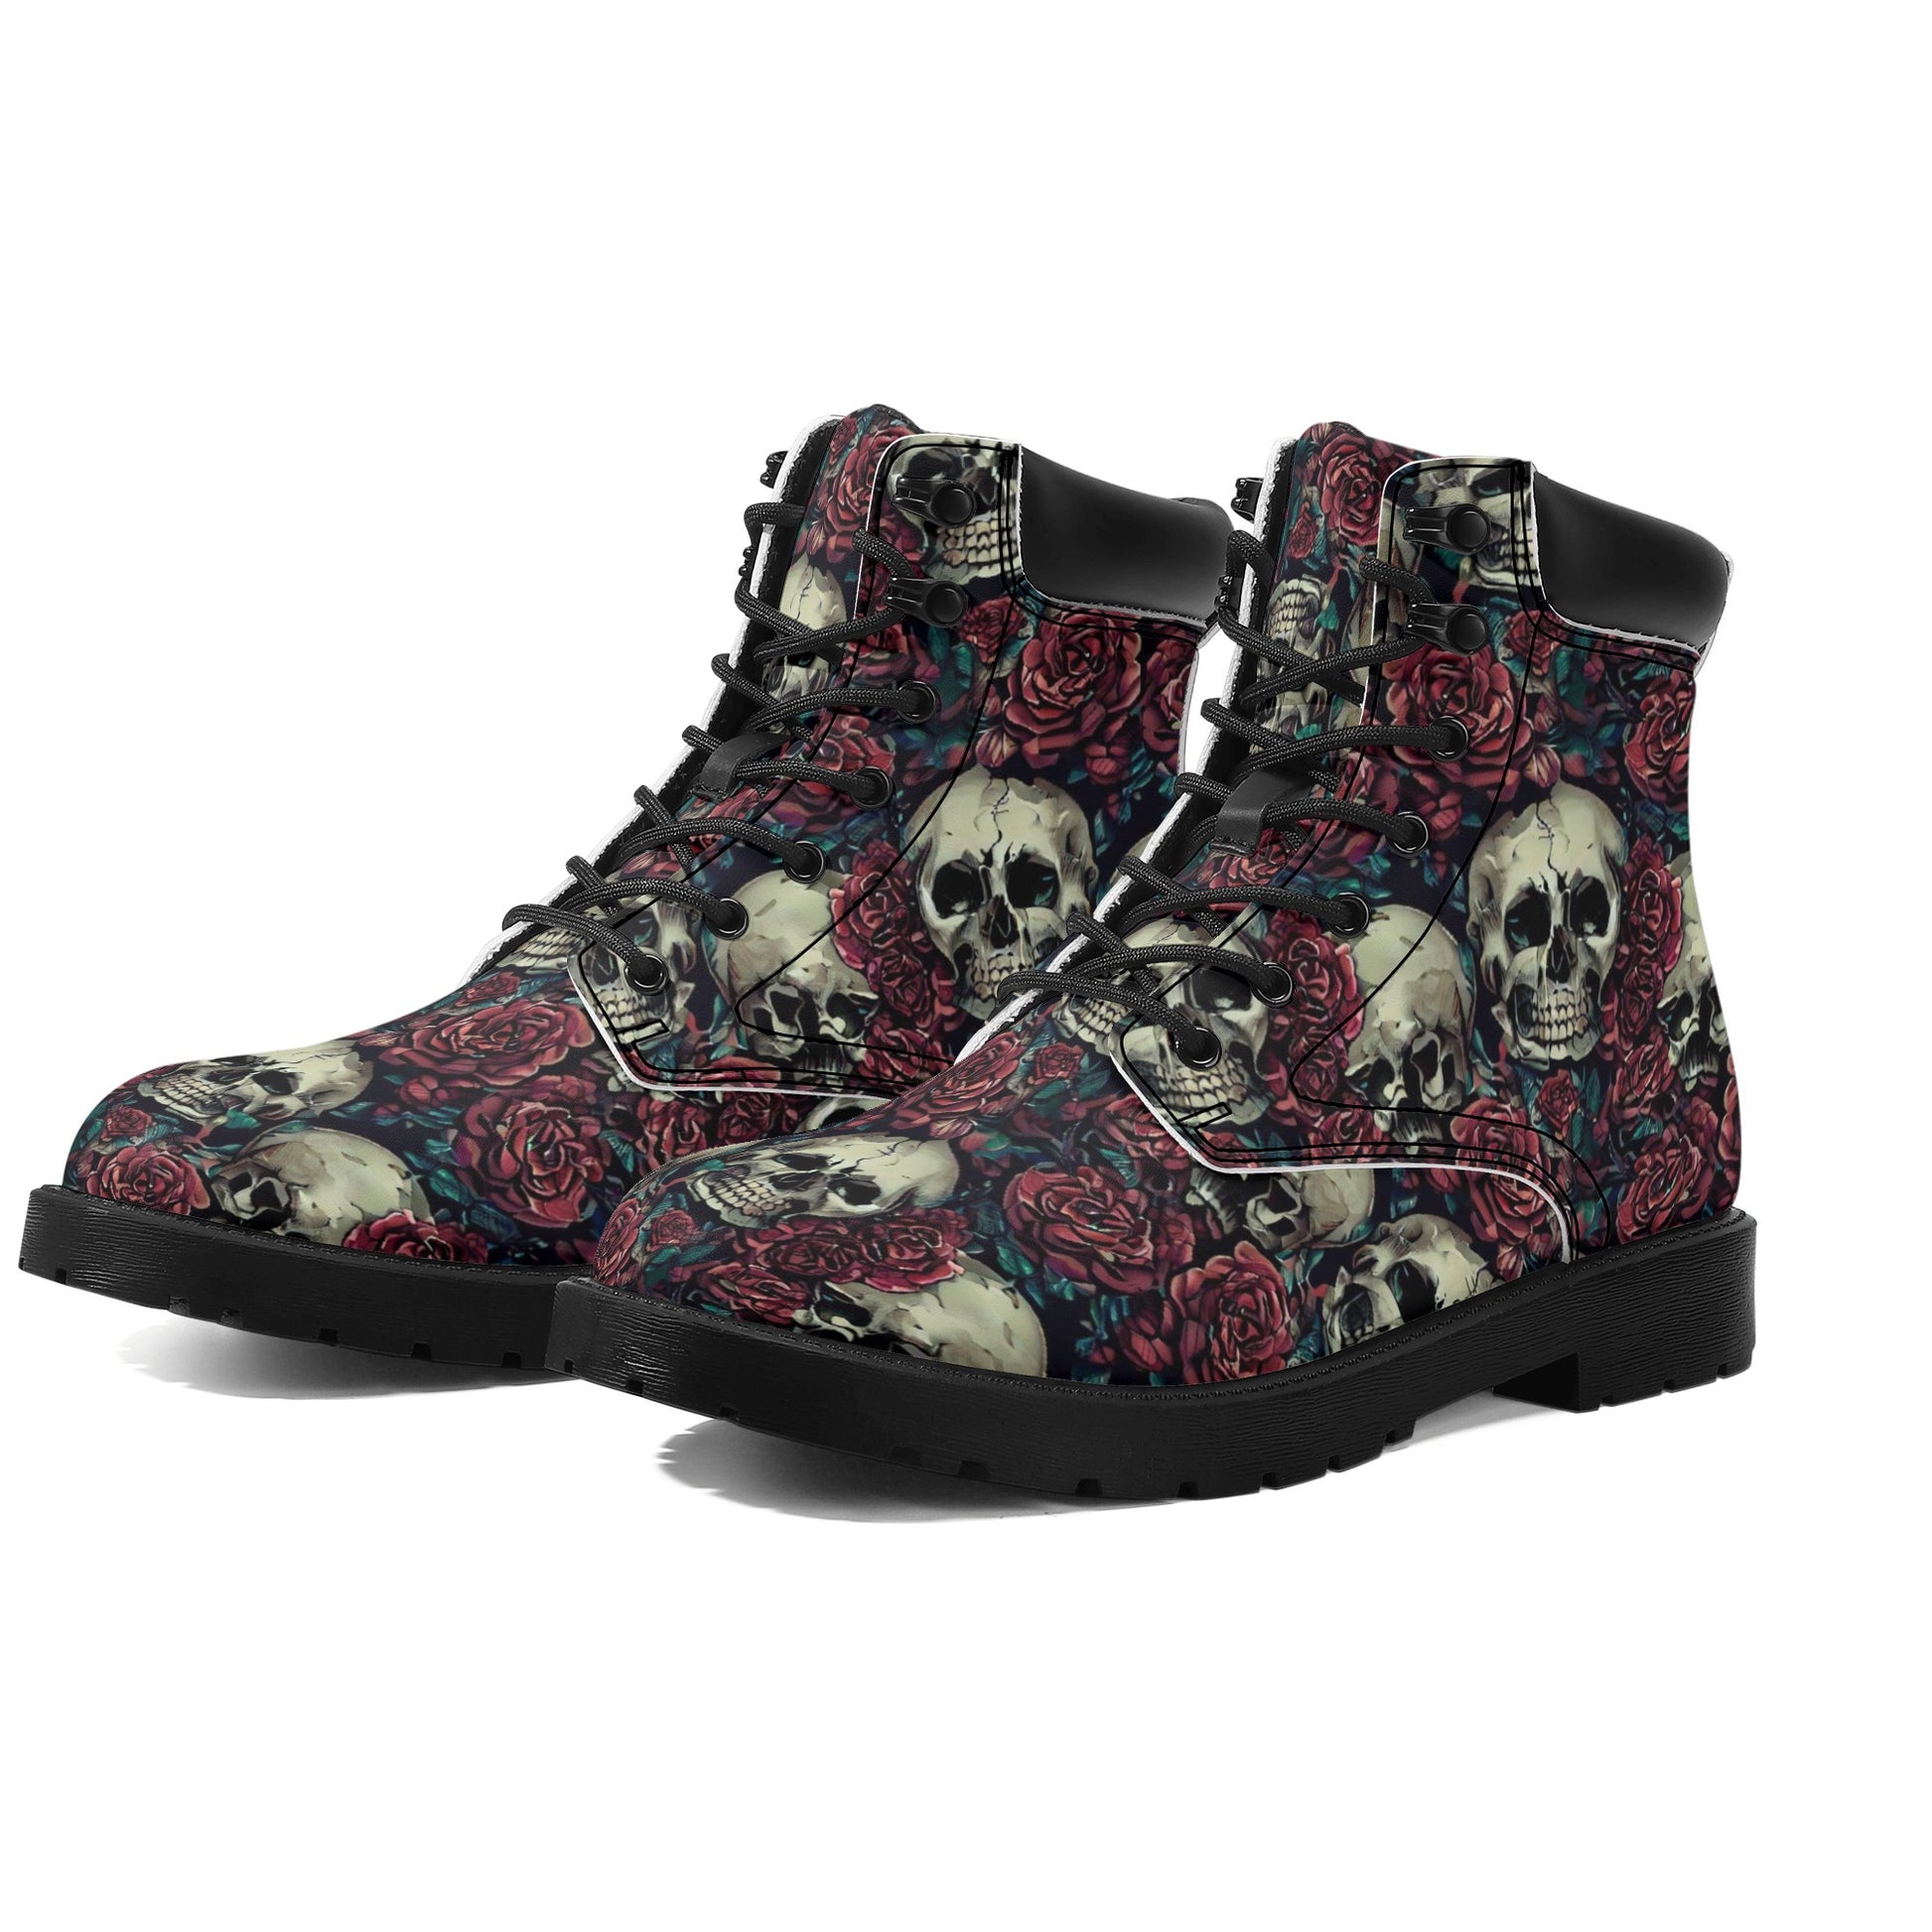 Main Product: Skulls & Roses Men's All-Season Leather Boots - Front View